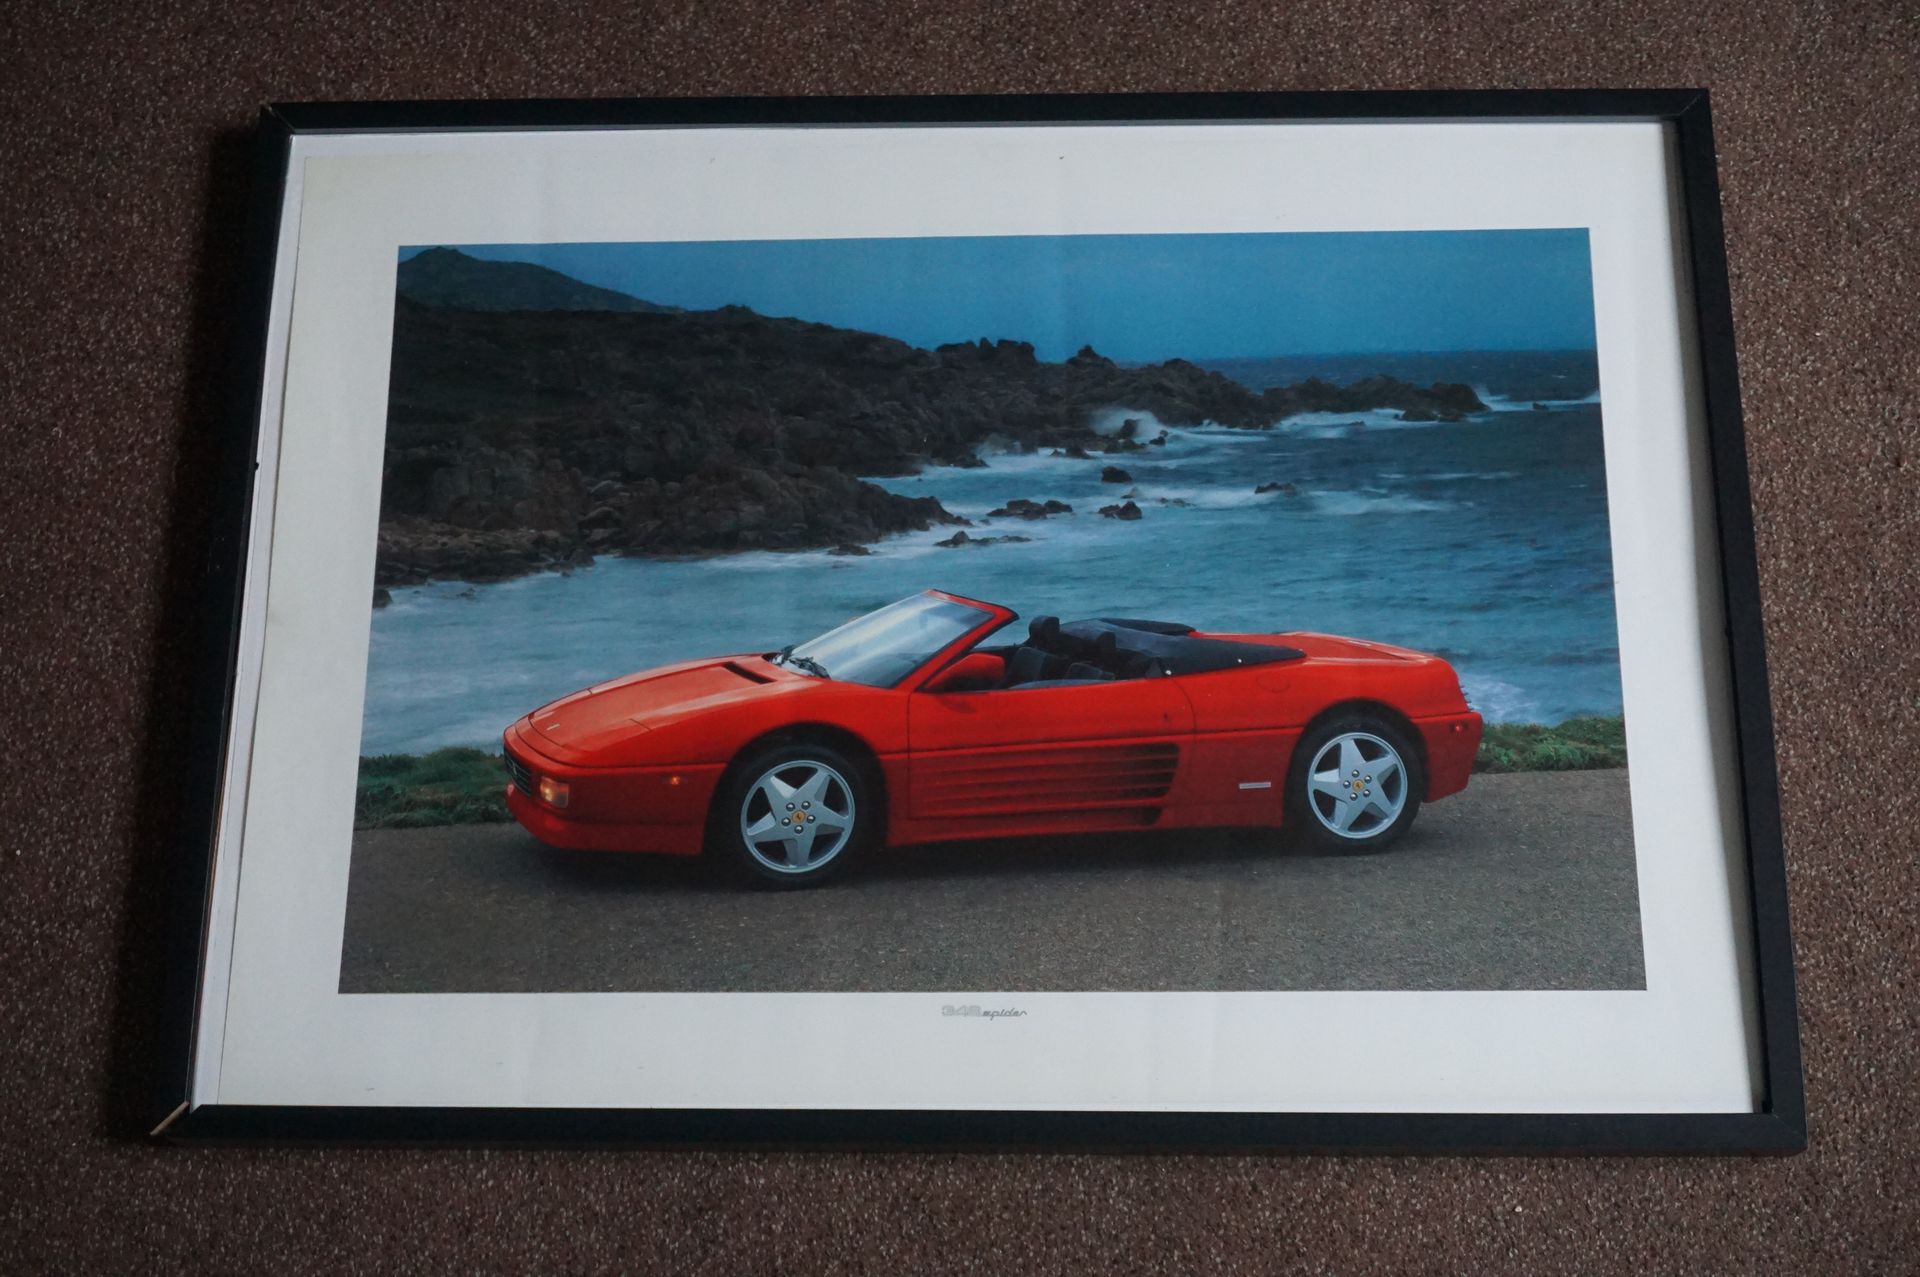 Null Ferrari 348 Spider in front of the sea
Framed under glass 
54 x 73 cm